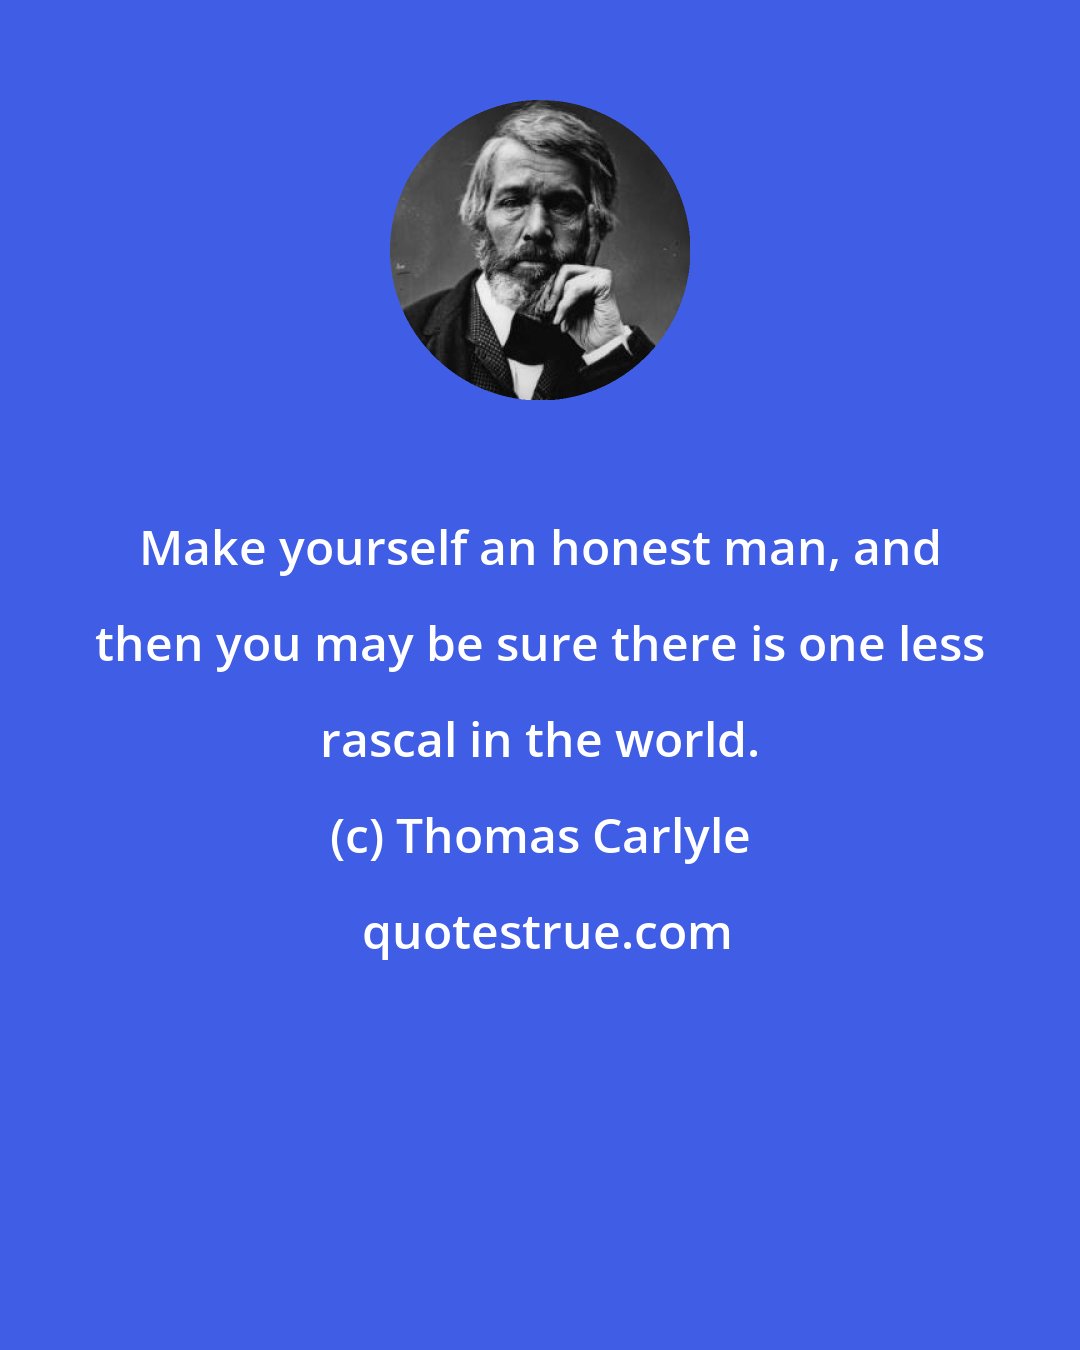 Thomas Carlyle: Make yourself an honest man, and then you may be sure there is one less rascal in the world.